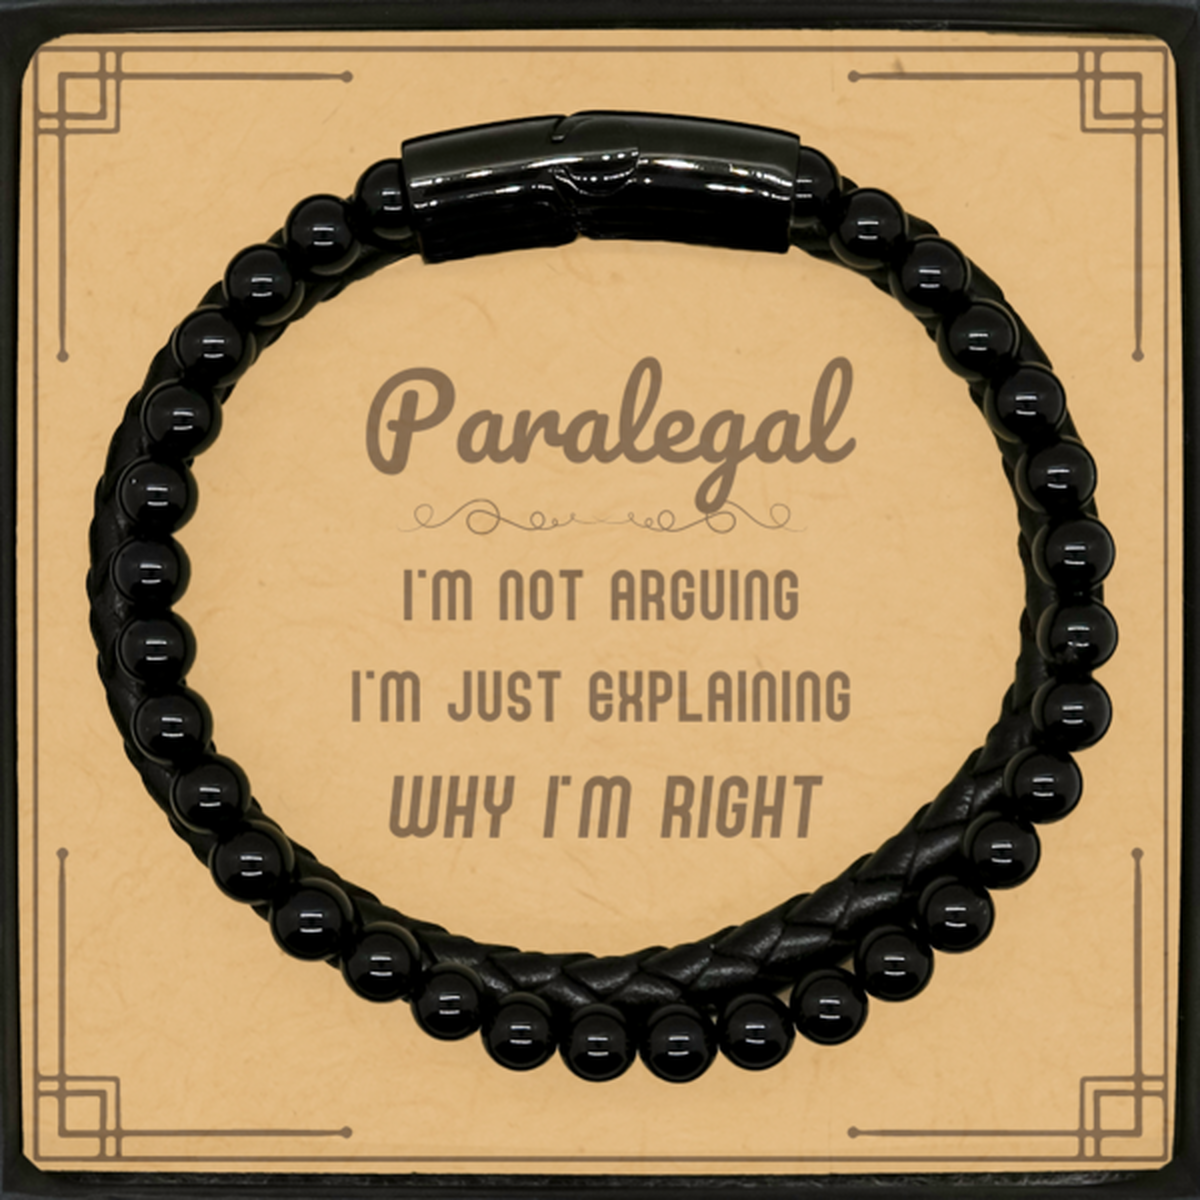 Paralegal I'm not Arguing. I'm Just Explaining Why I'm RIGHT Stone Leather Bracelets, Funny Saying Quote Paralegal Gifts For Paralegal Message Card Graduation Birthday Christmas Gifts for Men Women Coworker